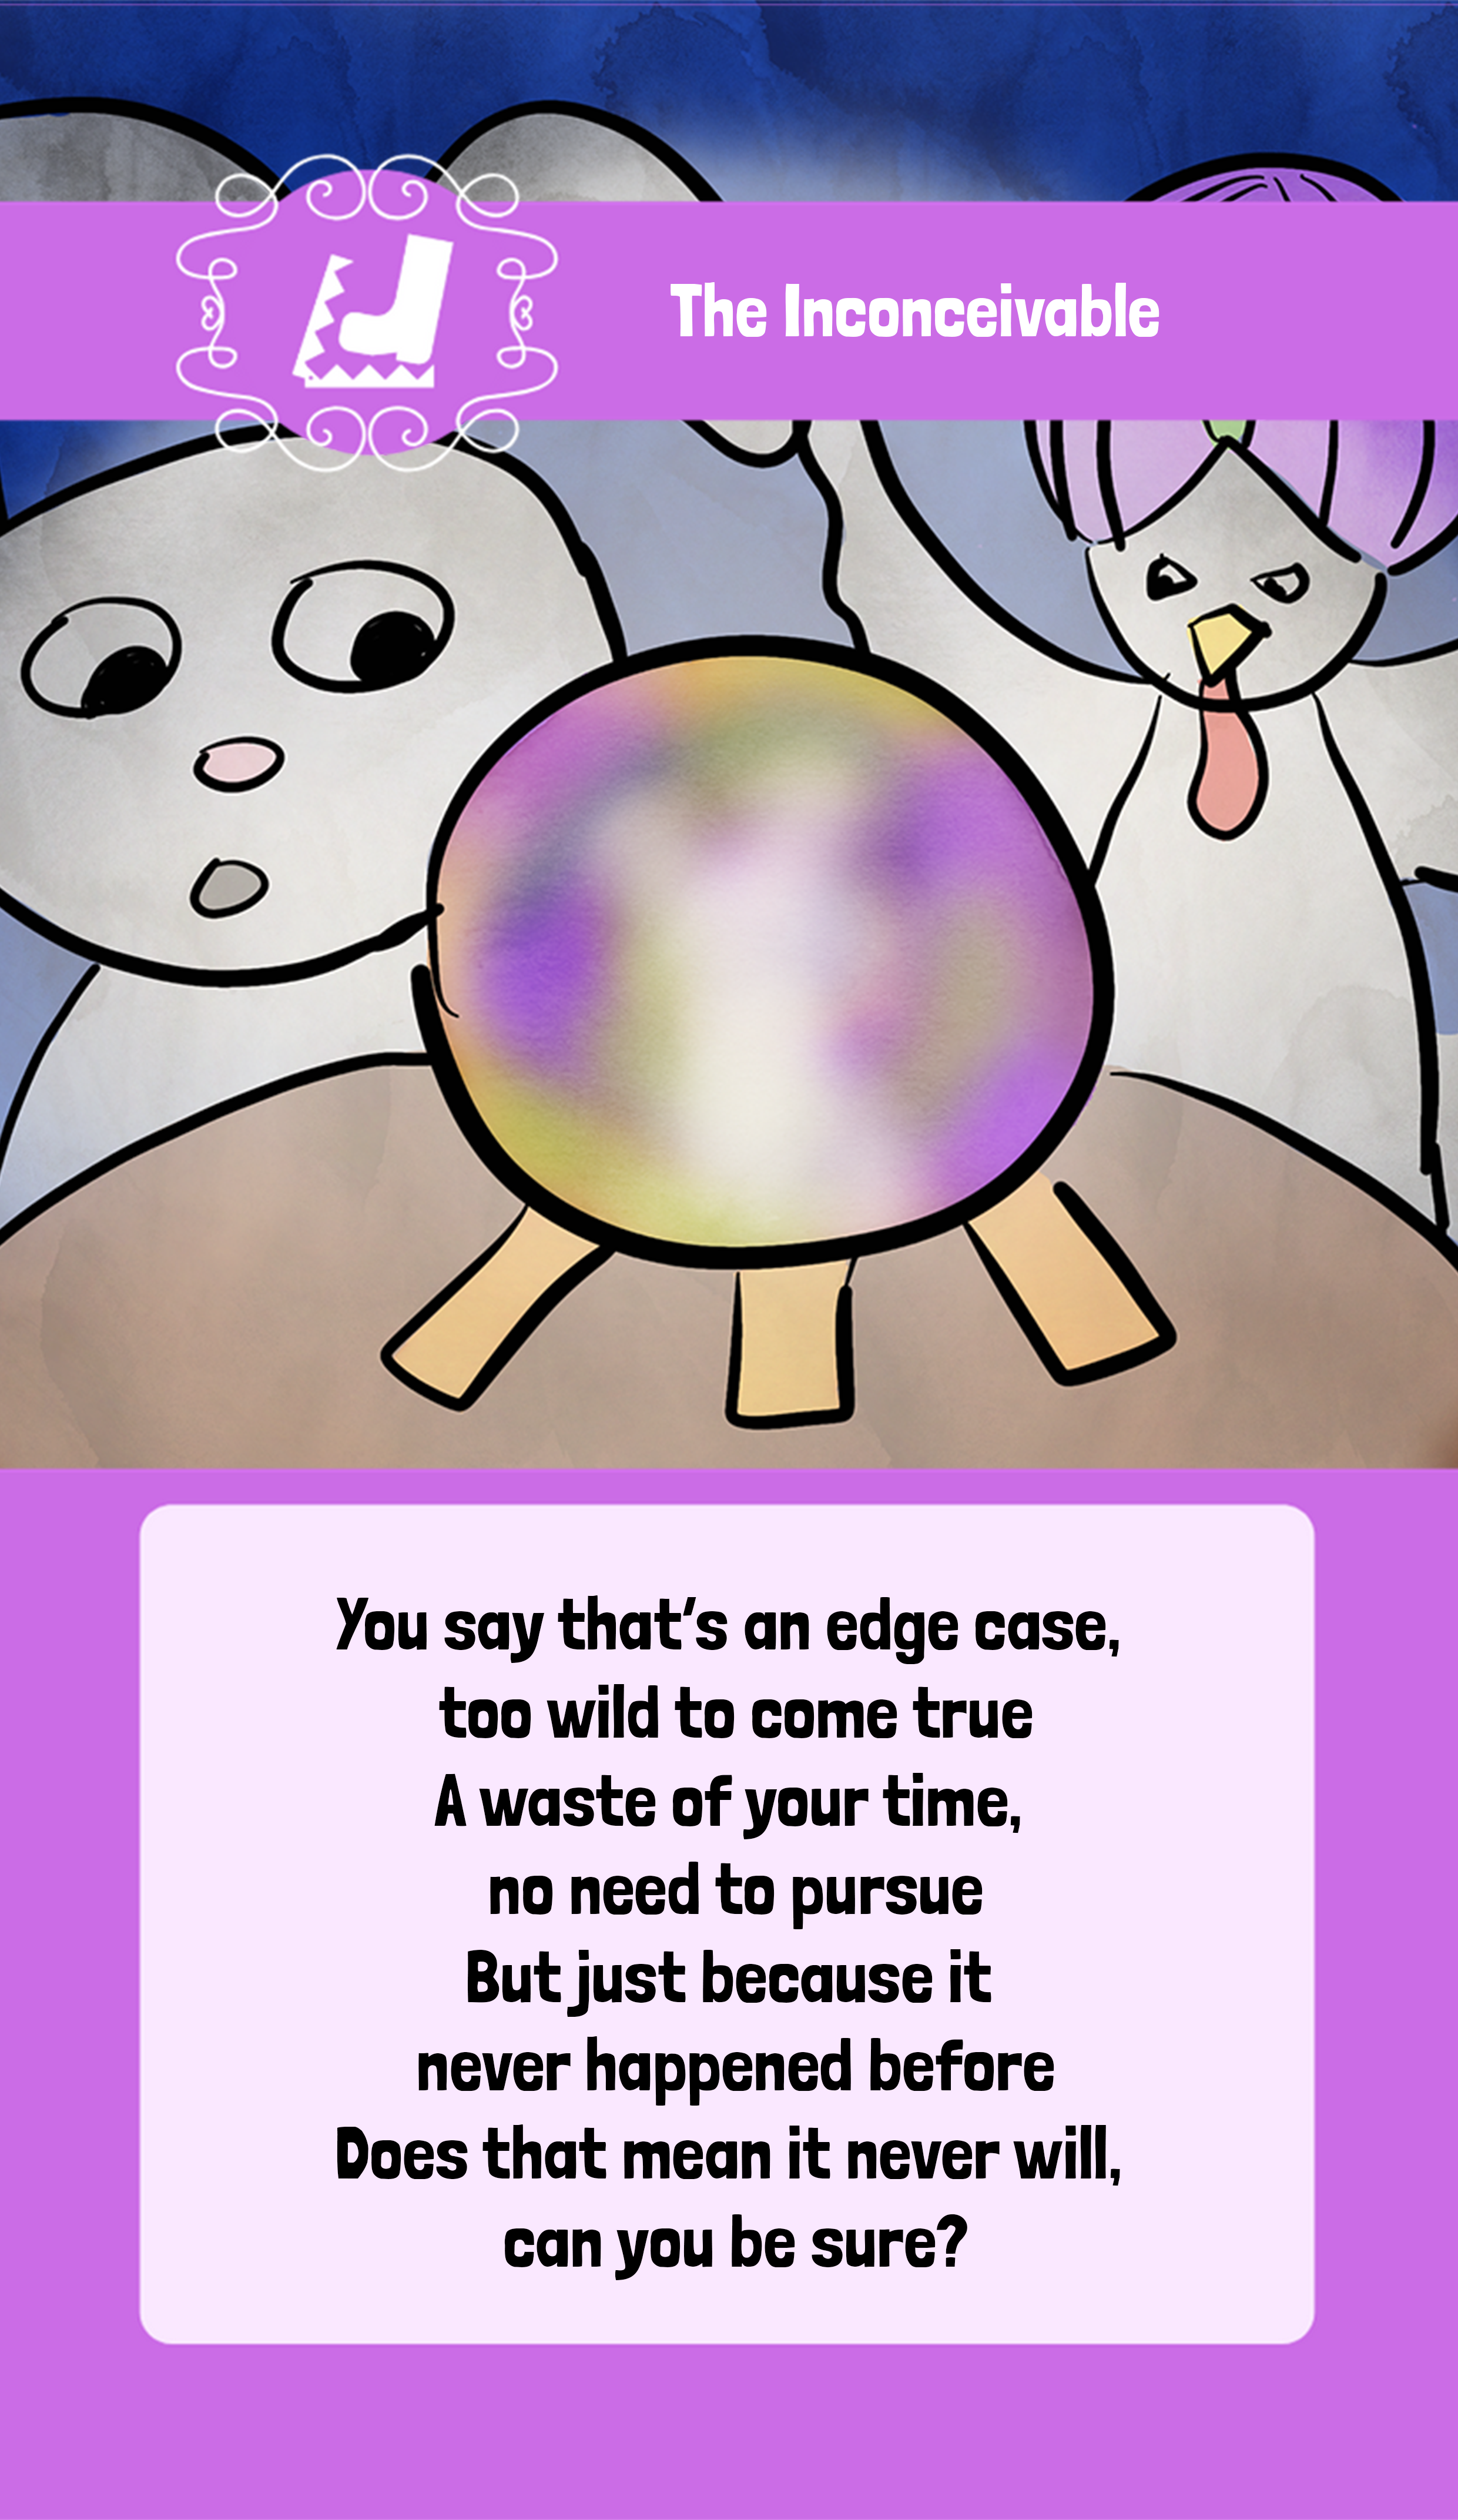 picture of a rabbit and a chicken looking at a crystal ball